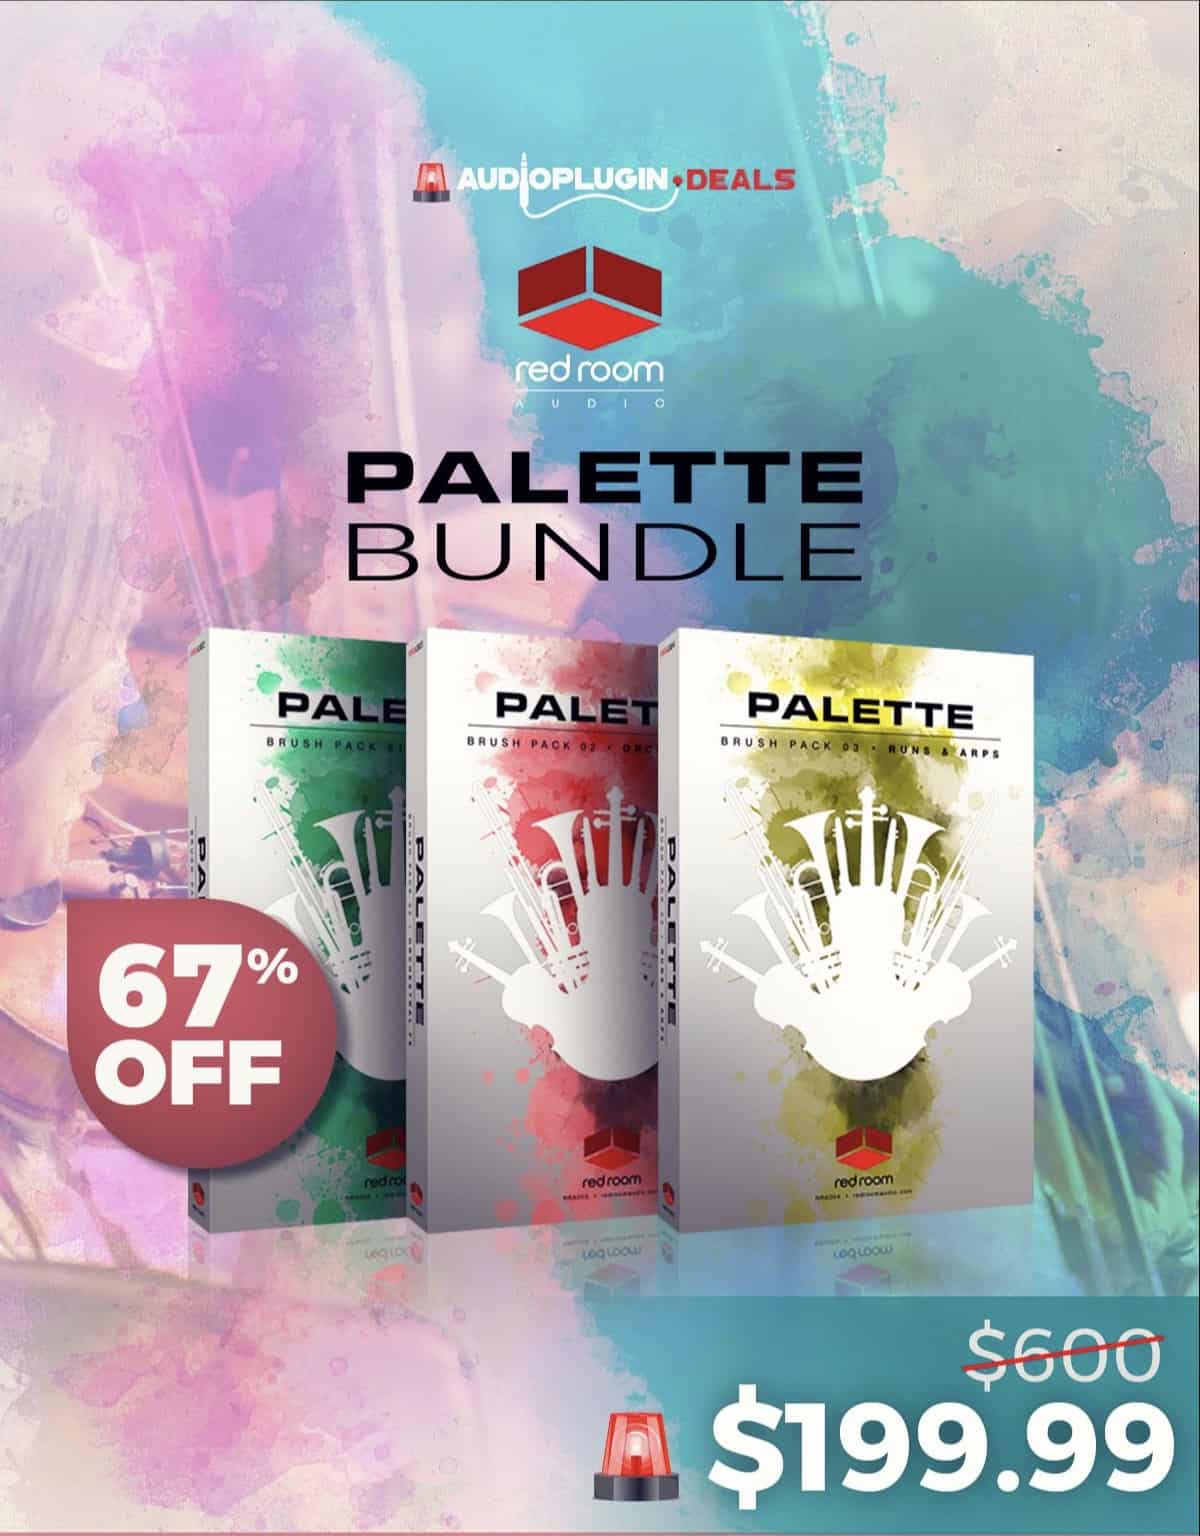 67 OFF PALETTE BUNDLE BY RED ROOM AUDIO